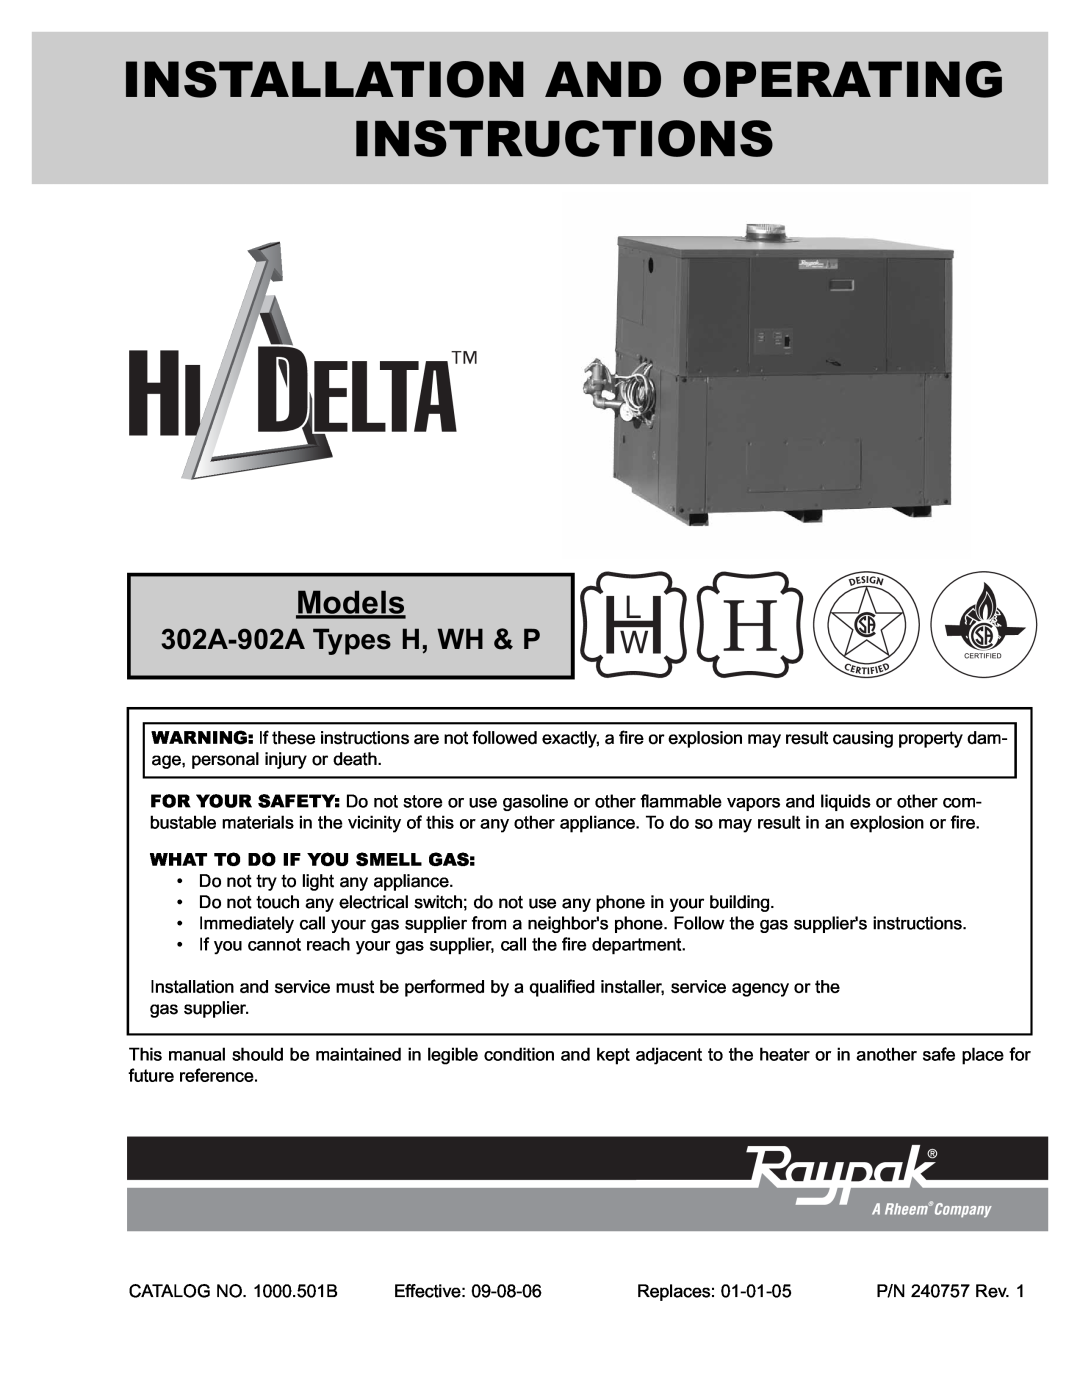 Raypak manual Models, Installation And Operating Instructions, 302A-902ATypes H, WH & P, What To Do If You Smell Gas 